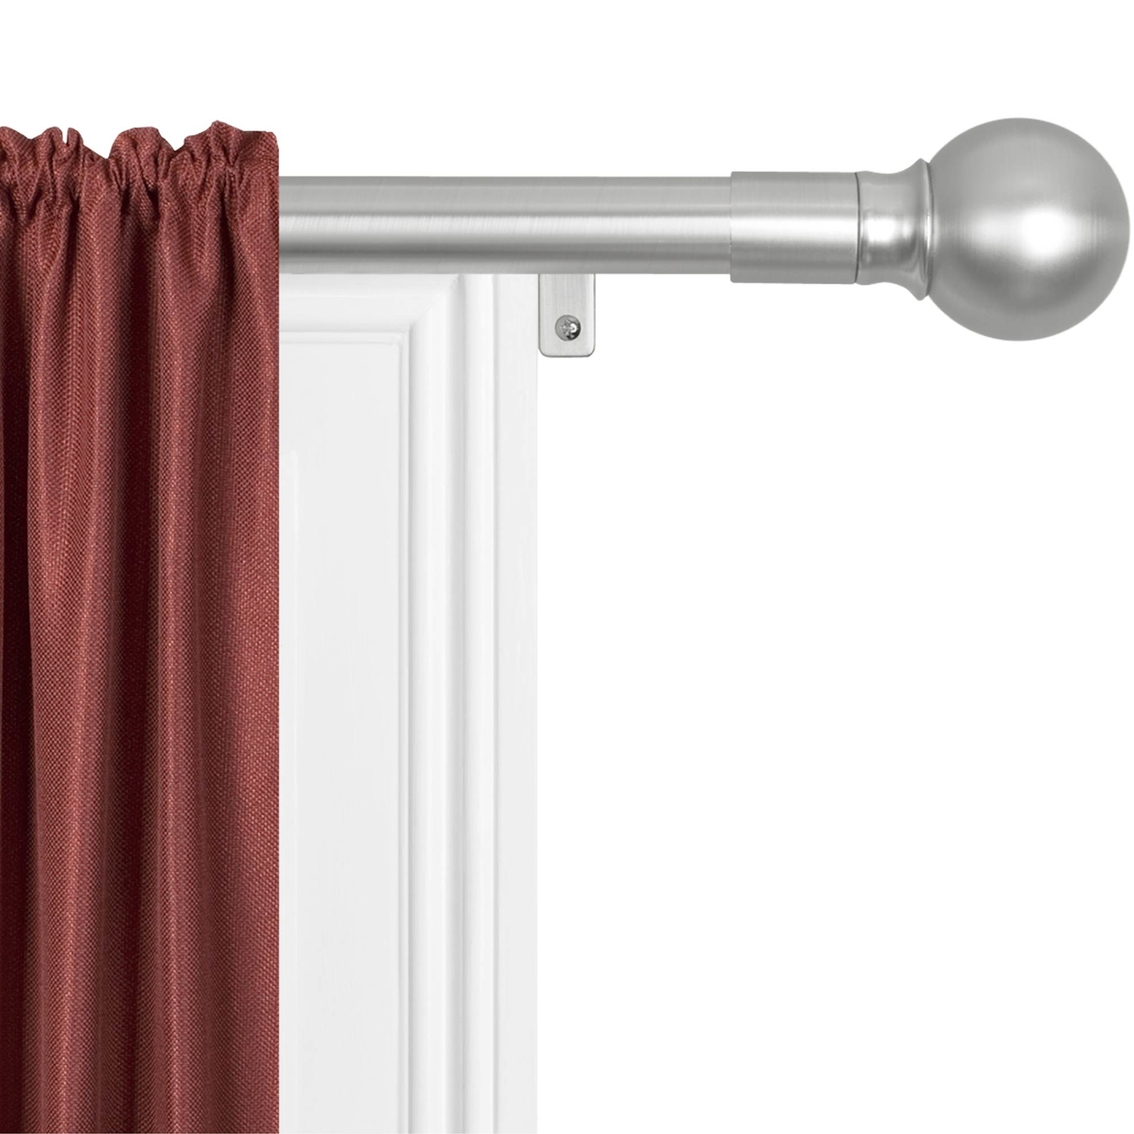 MAYTEX Smart Rods No Measuring Easy Install 1 Window Drapery Curtain Rod with Ball Finial 18 inch 48 inch Antique Brass Maytex Mills Inc 6252 